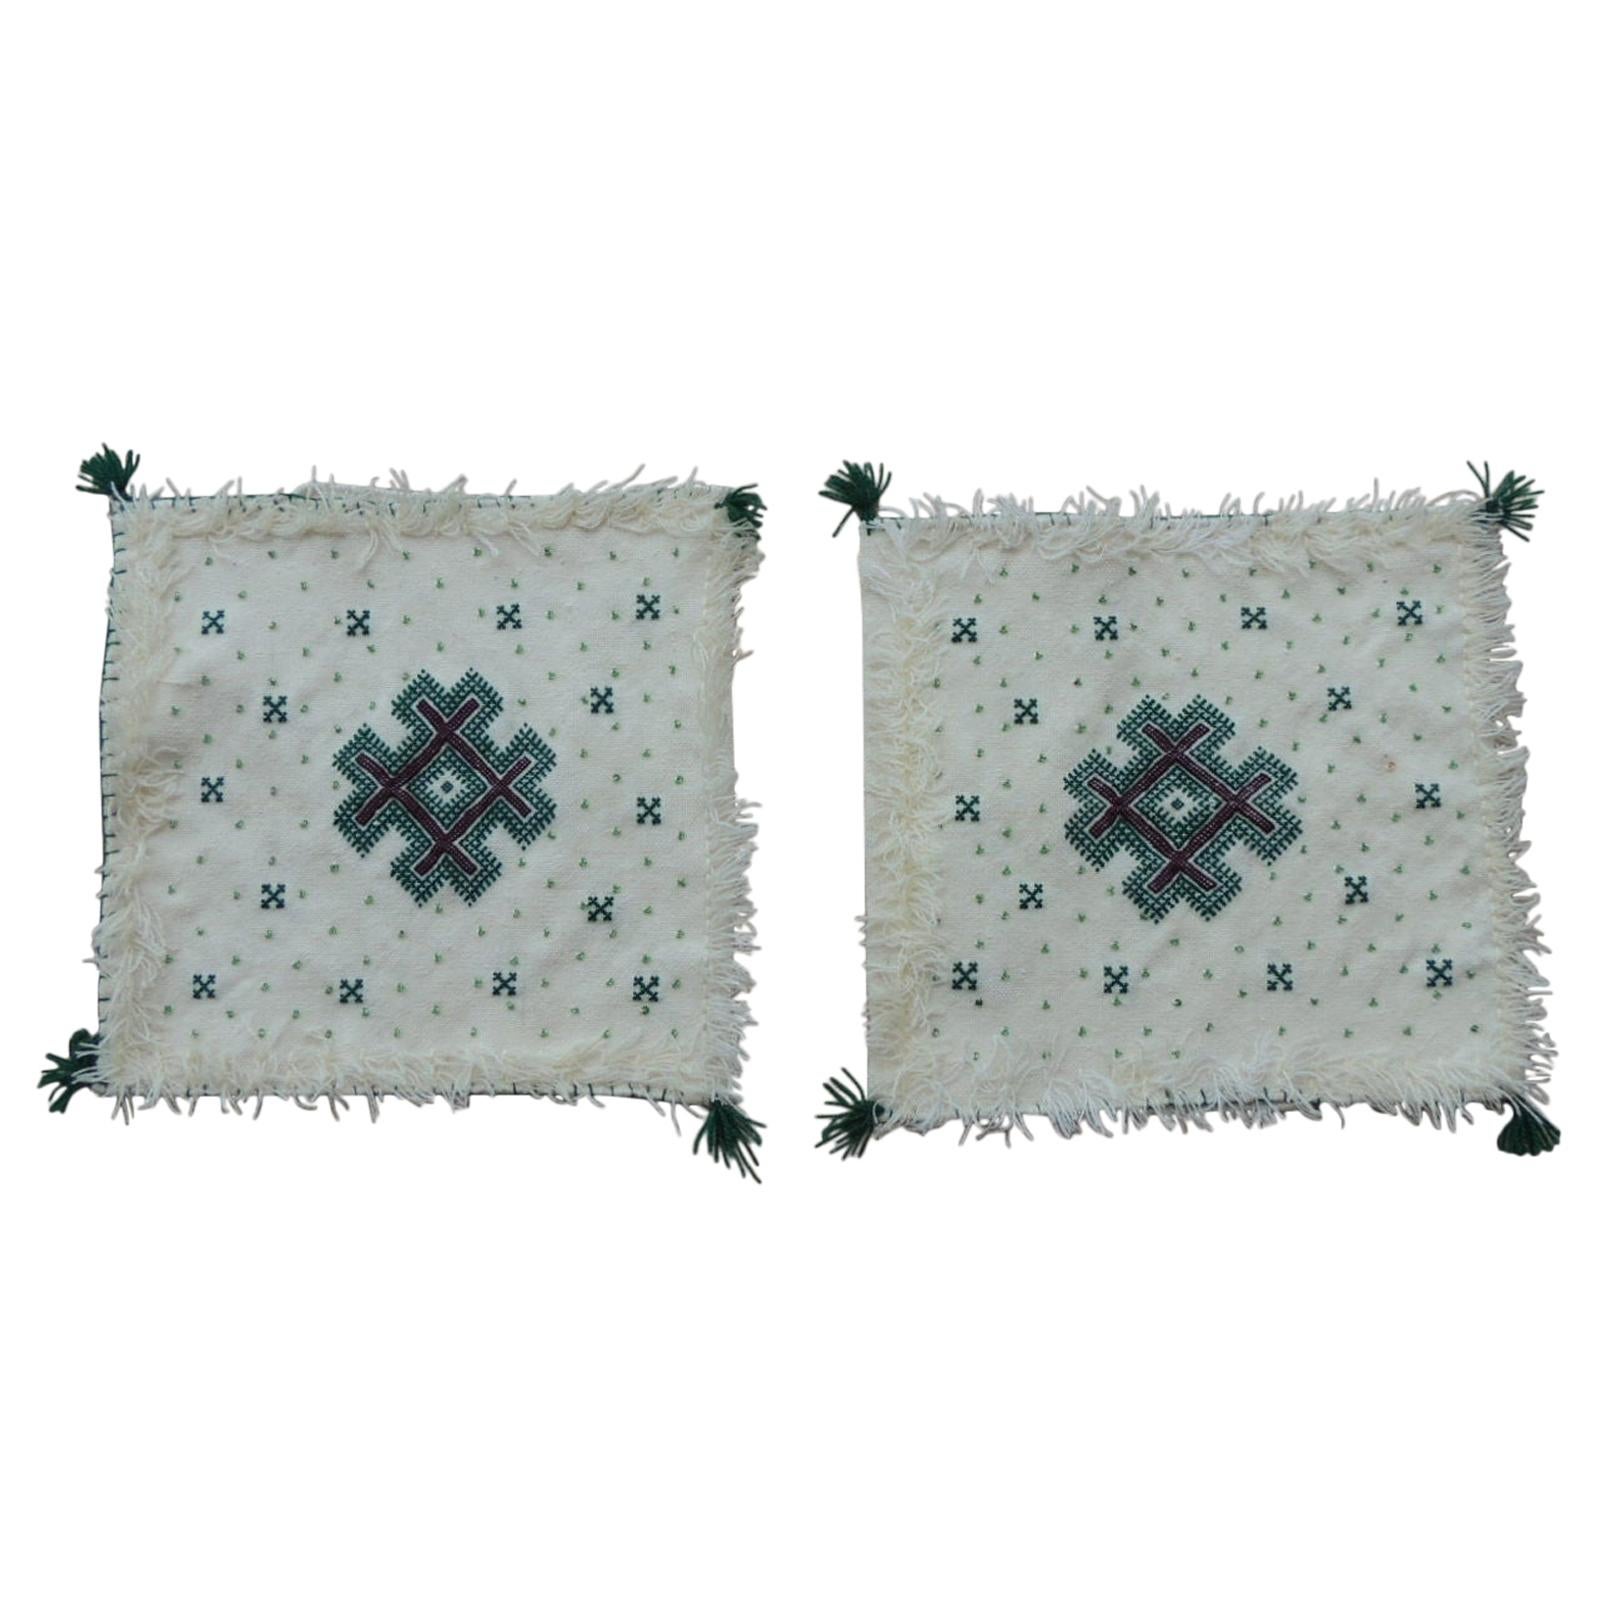 Pair of Petite Moroccan Beaded and Embroidered Pillow Covers with Tassels